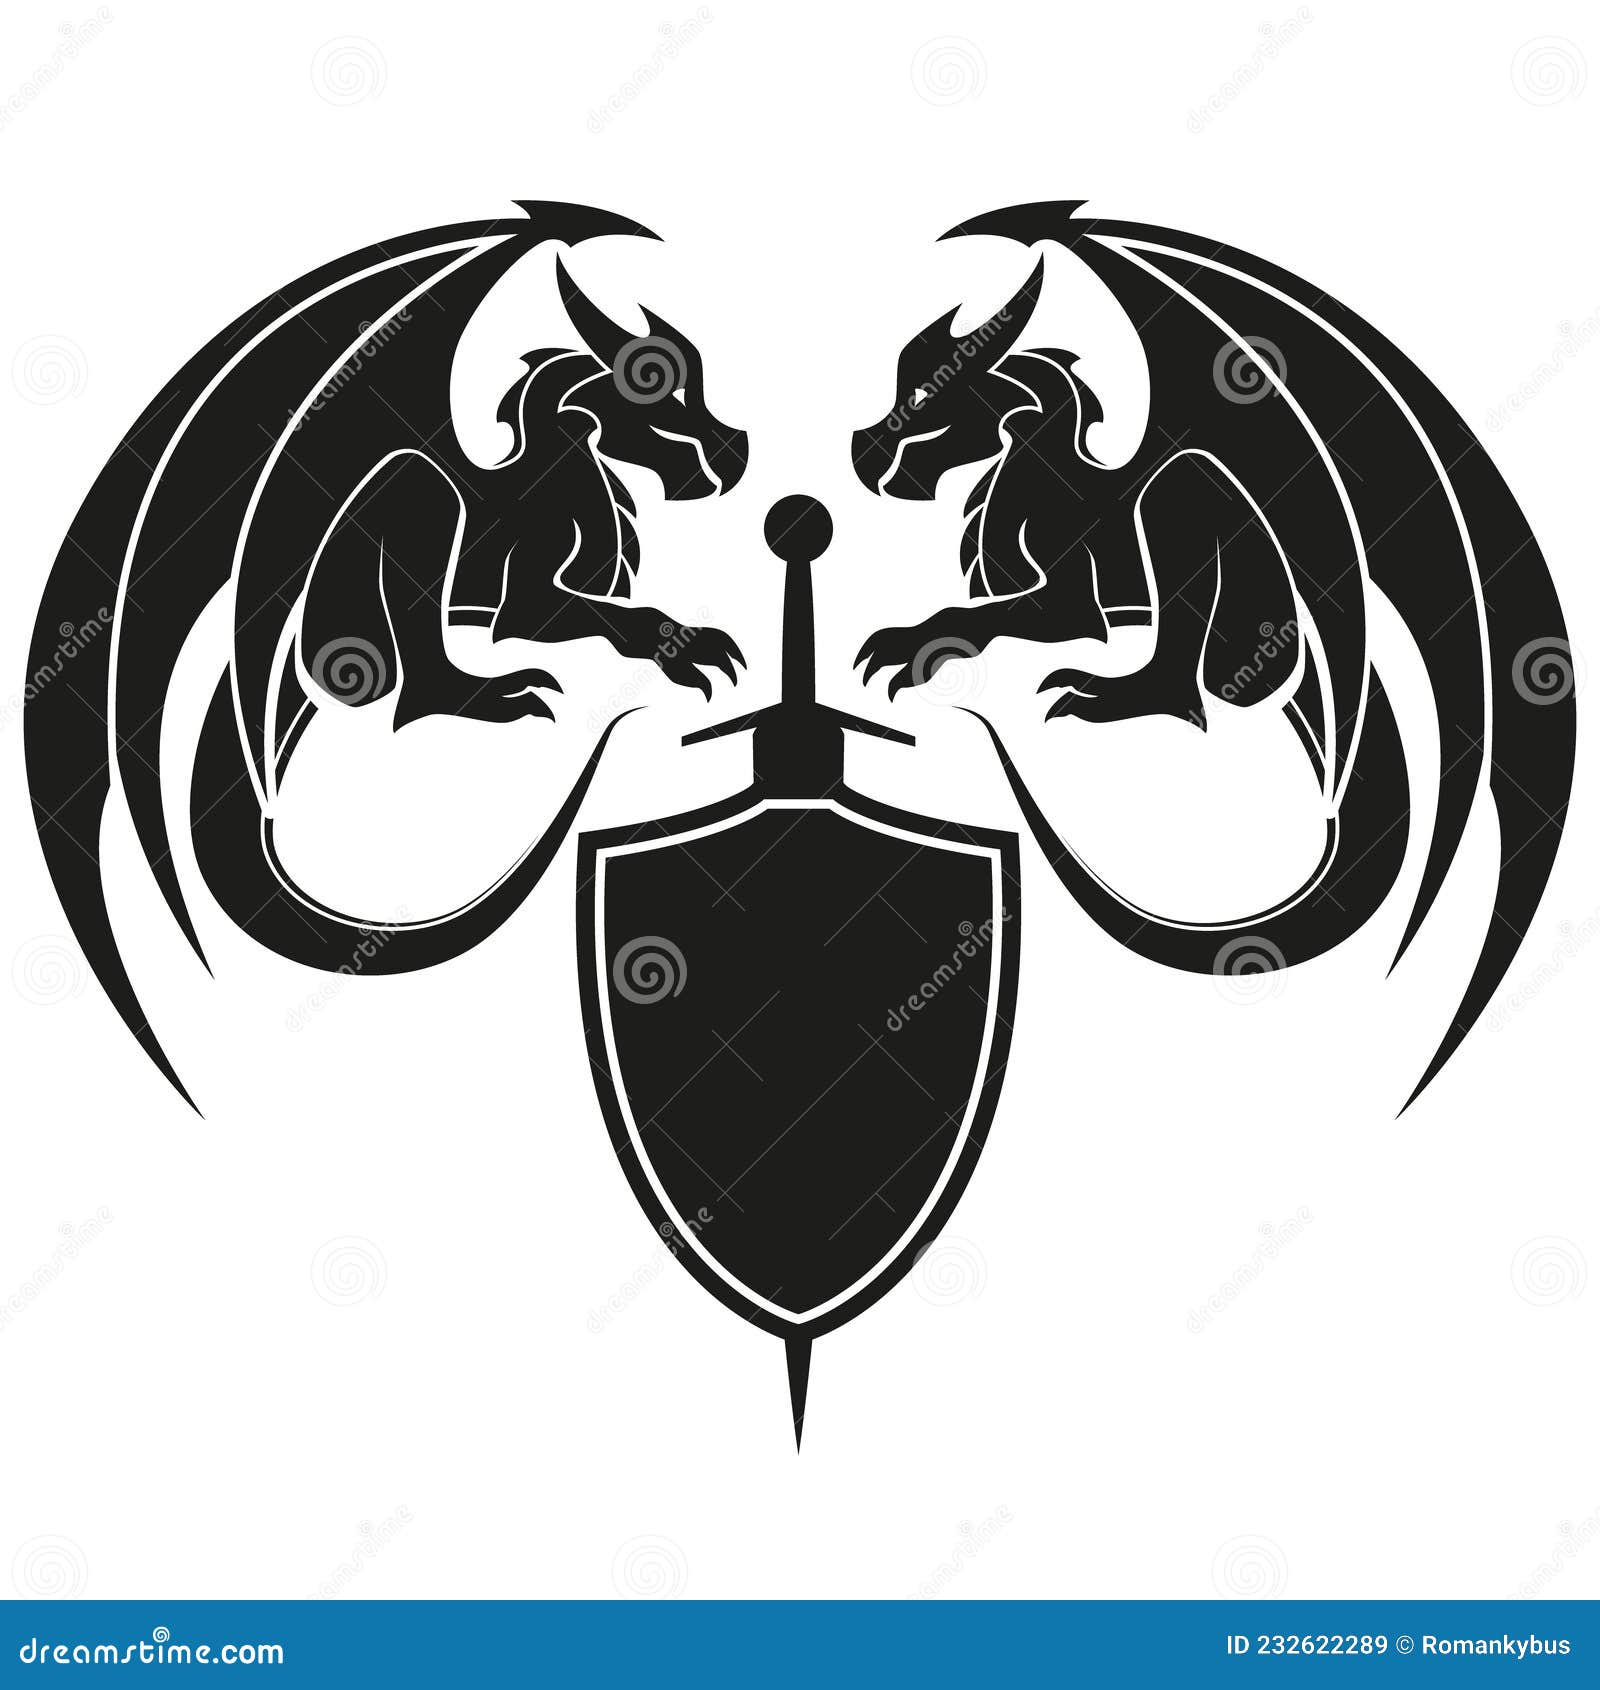 Two Dragons with Sword and Shield - Dragon Symbol, Black and White Illustration Vector Stock Vector - Illustration of tribal, dragon: 232622289